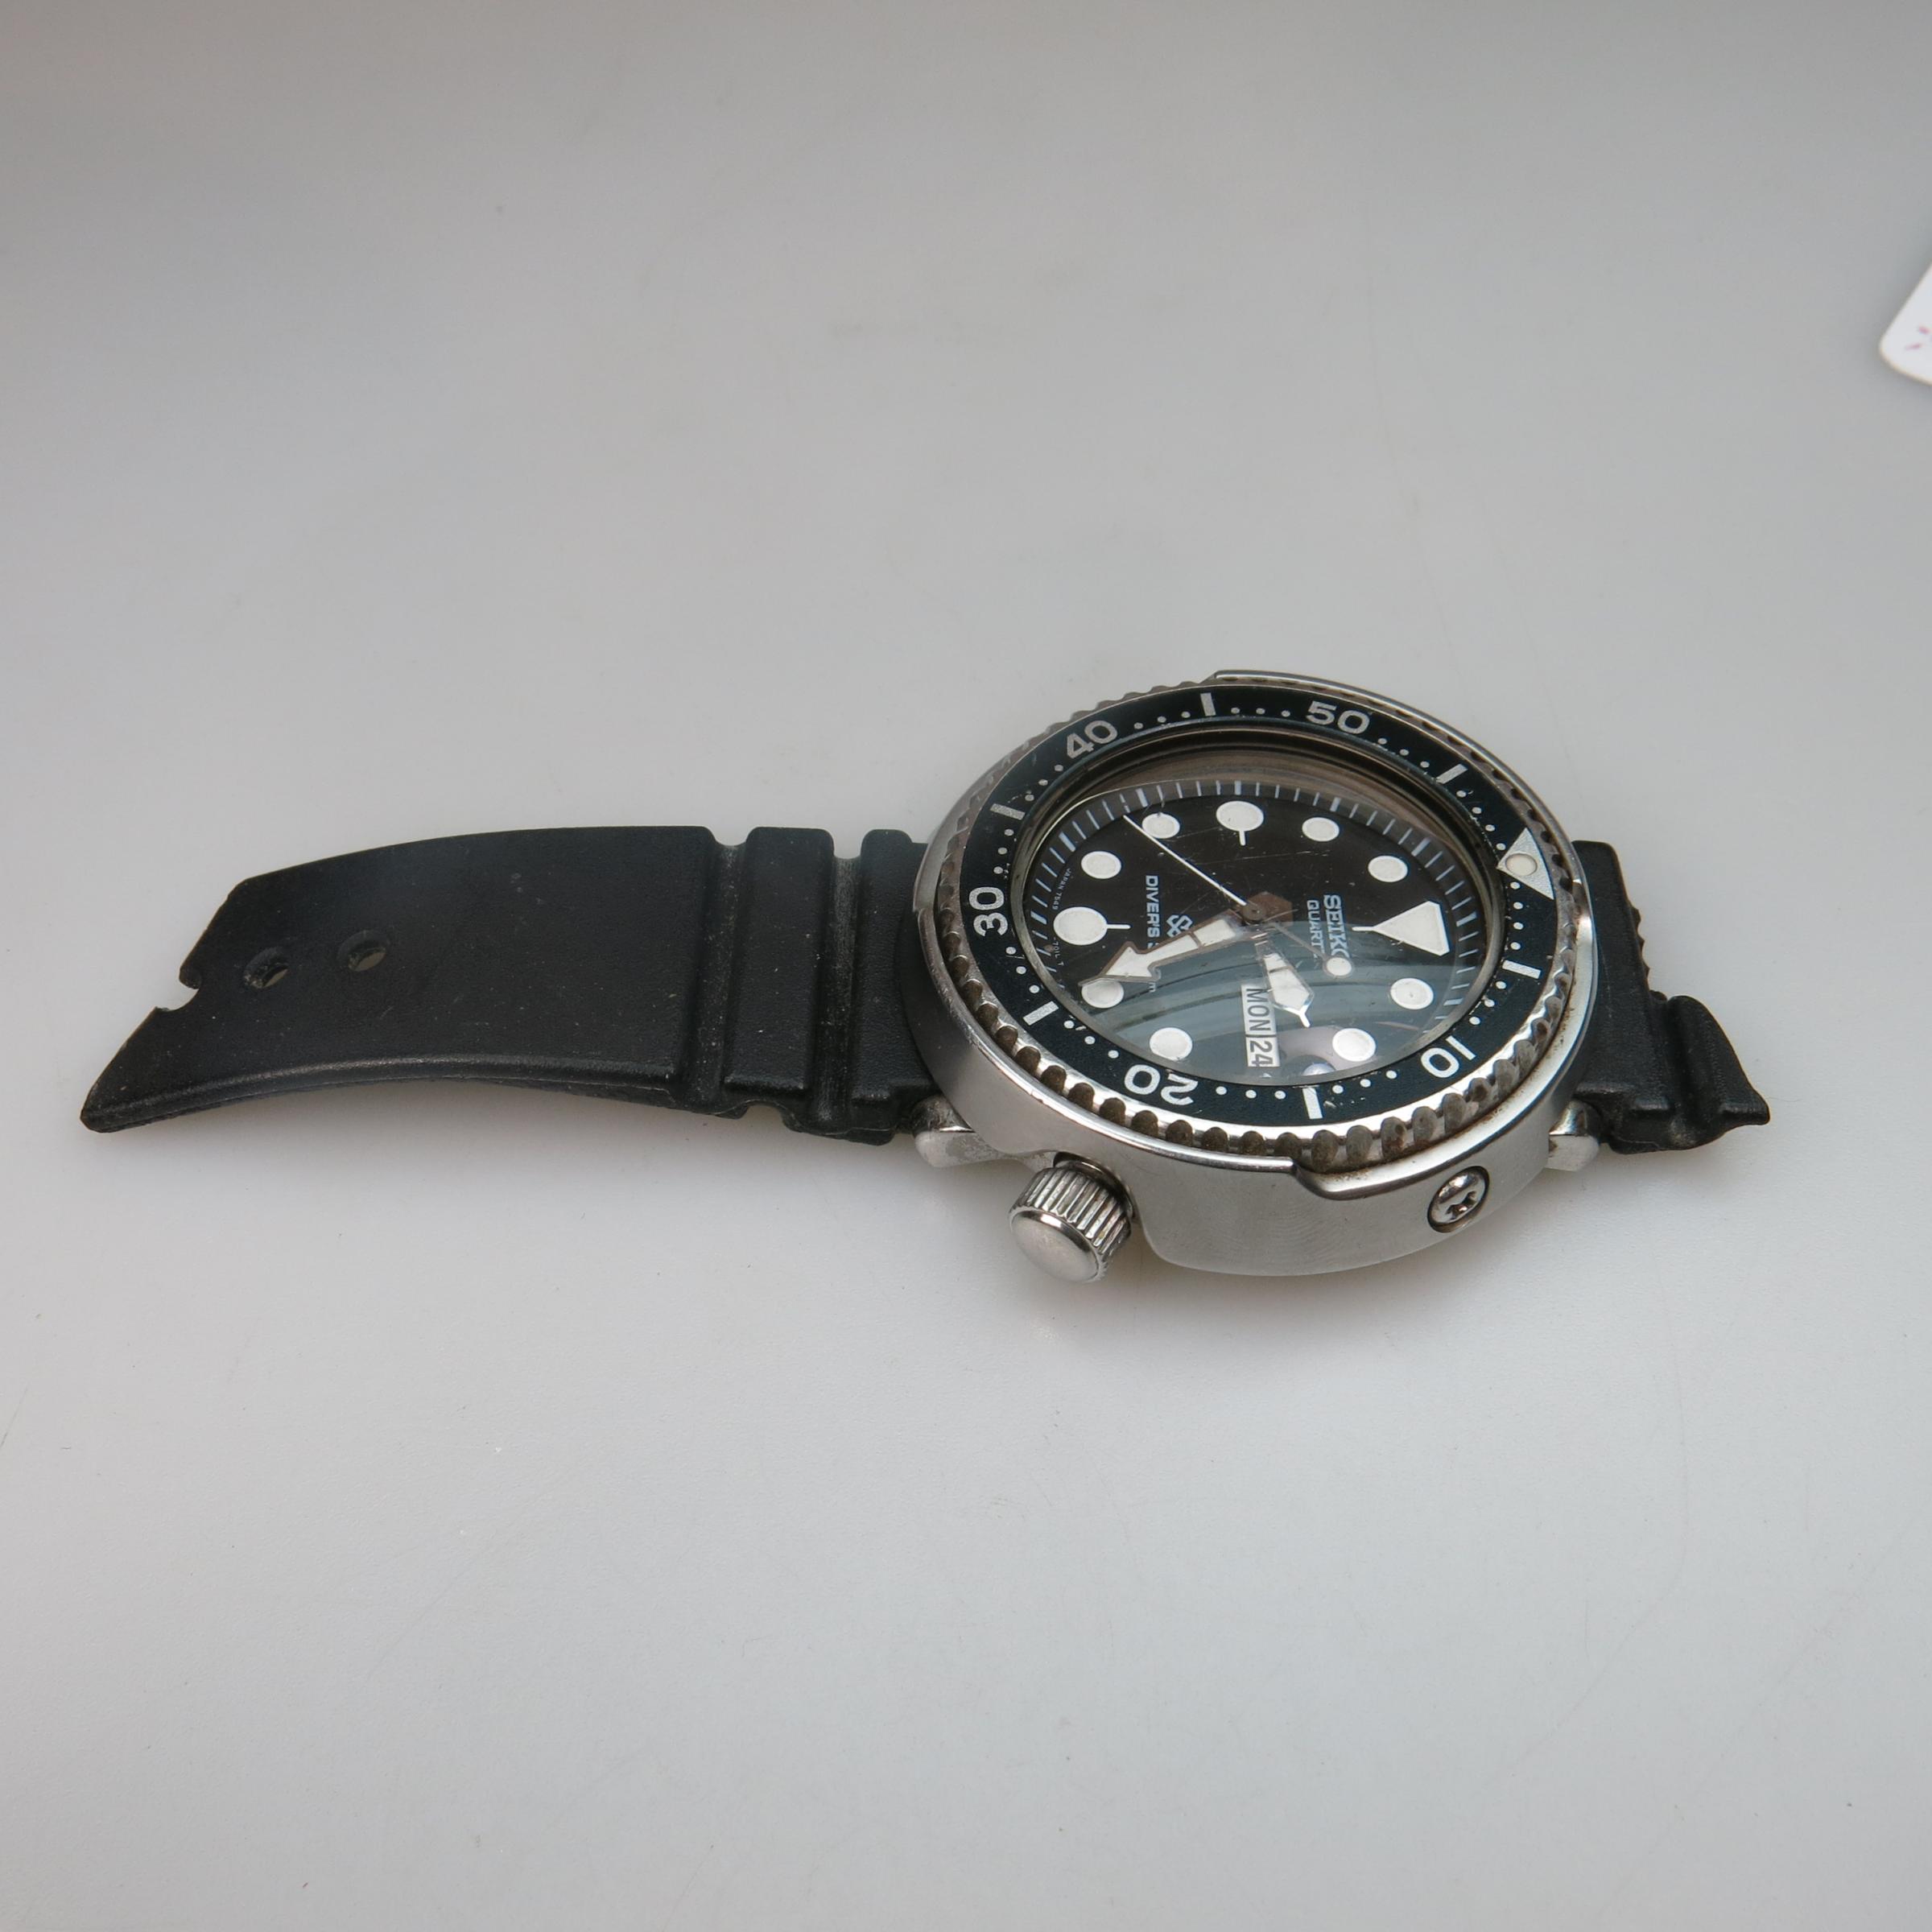 Seiko Diver's 300 'Tuna Can' Wristwatch, With Day & Date